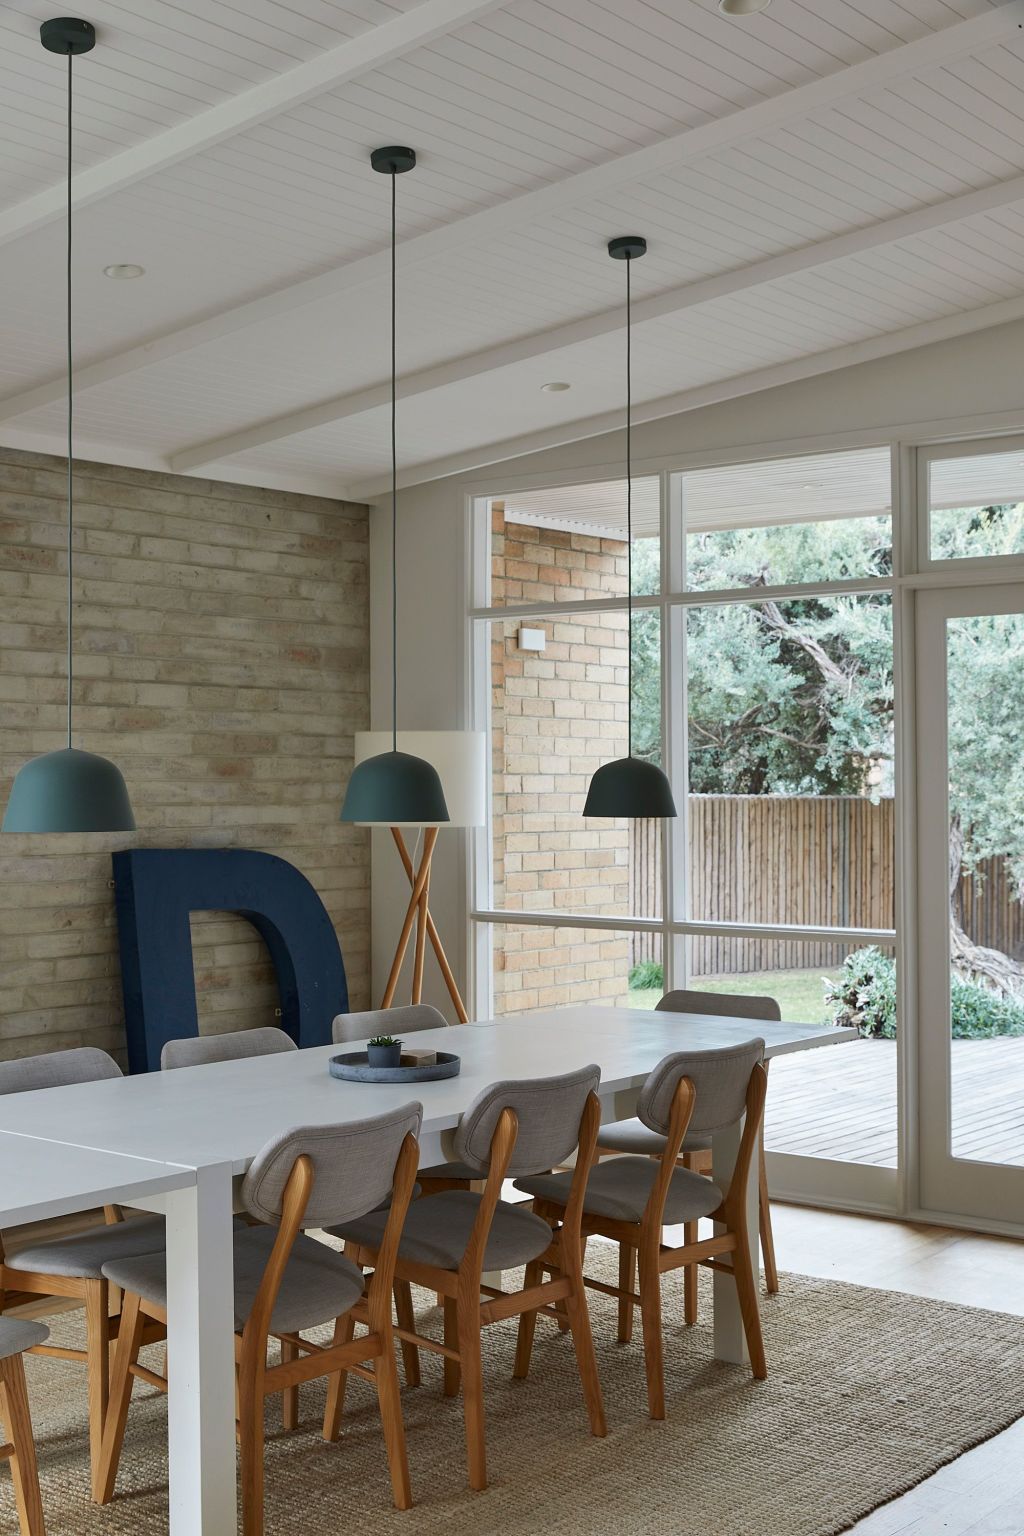 The internal bricks were deftly repointed and re-bagged to create another pattern in a simple home. Photo: Derek Swalwell